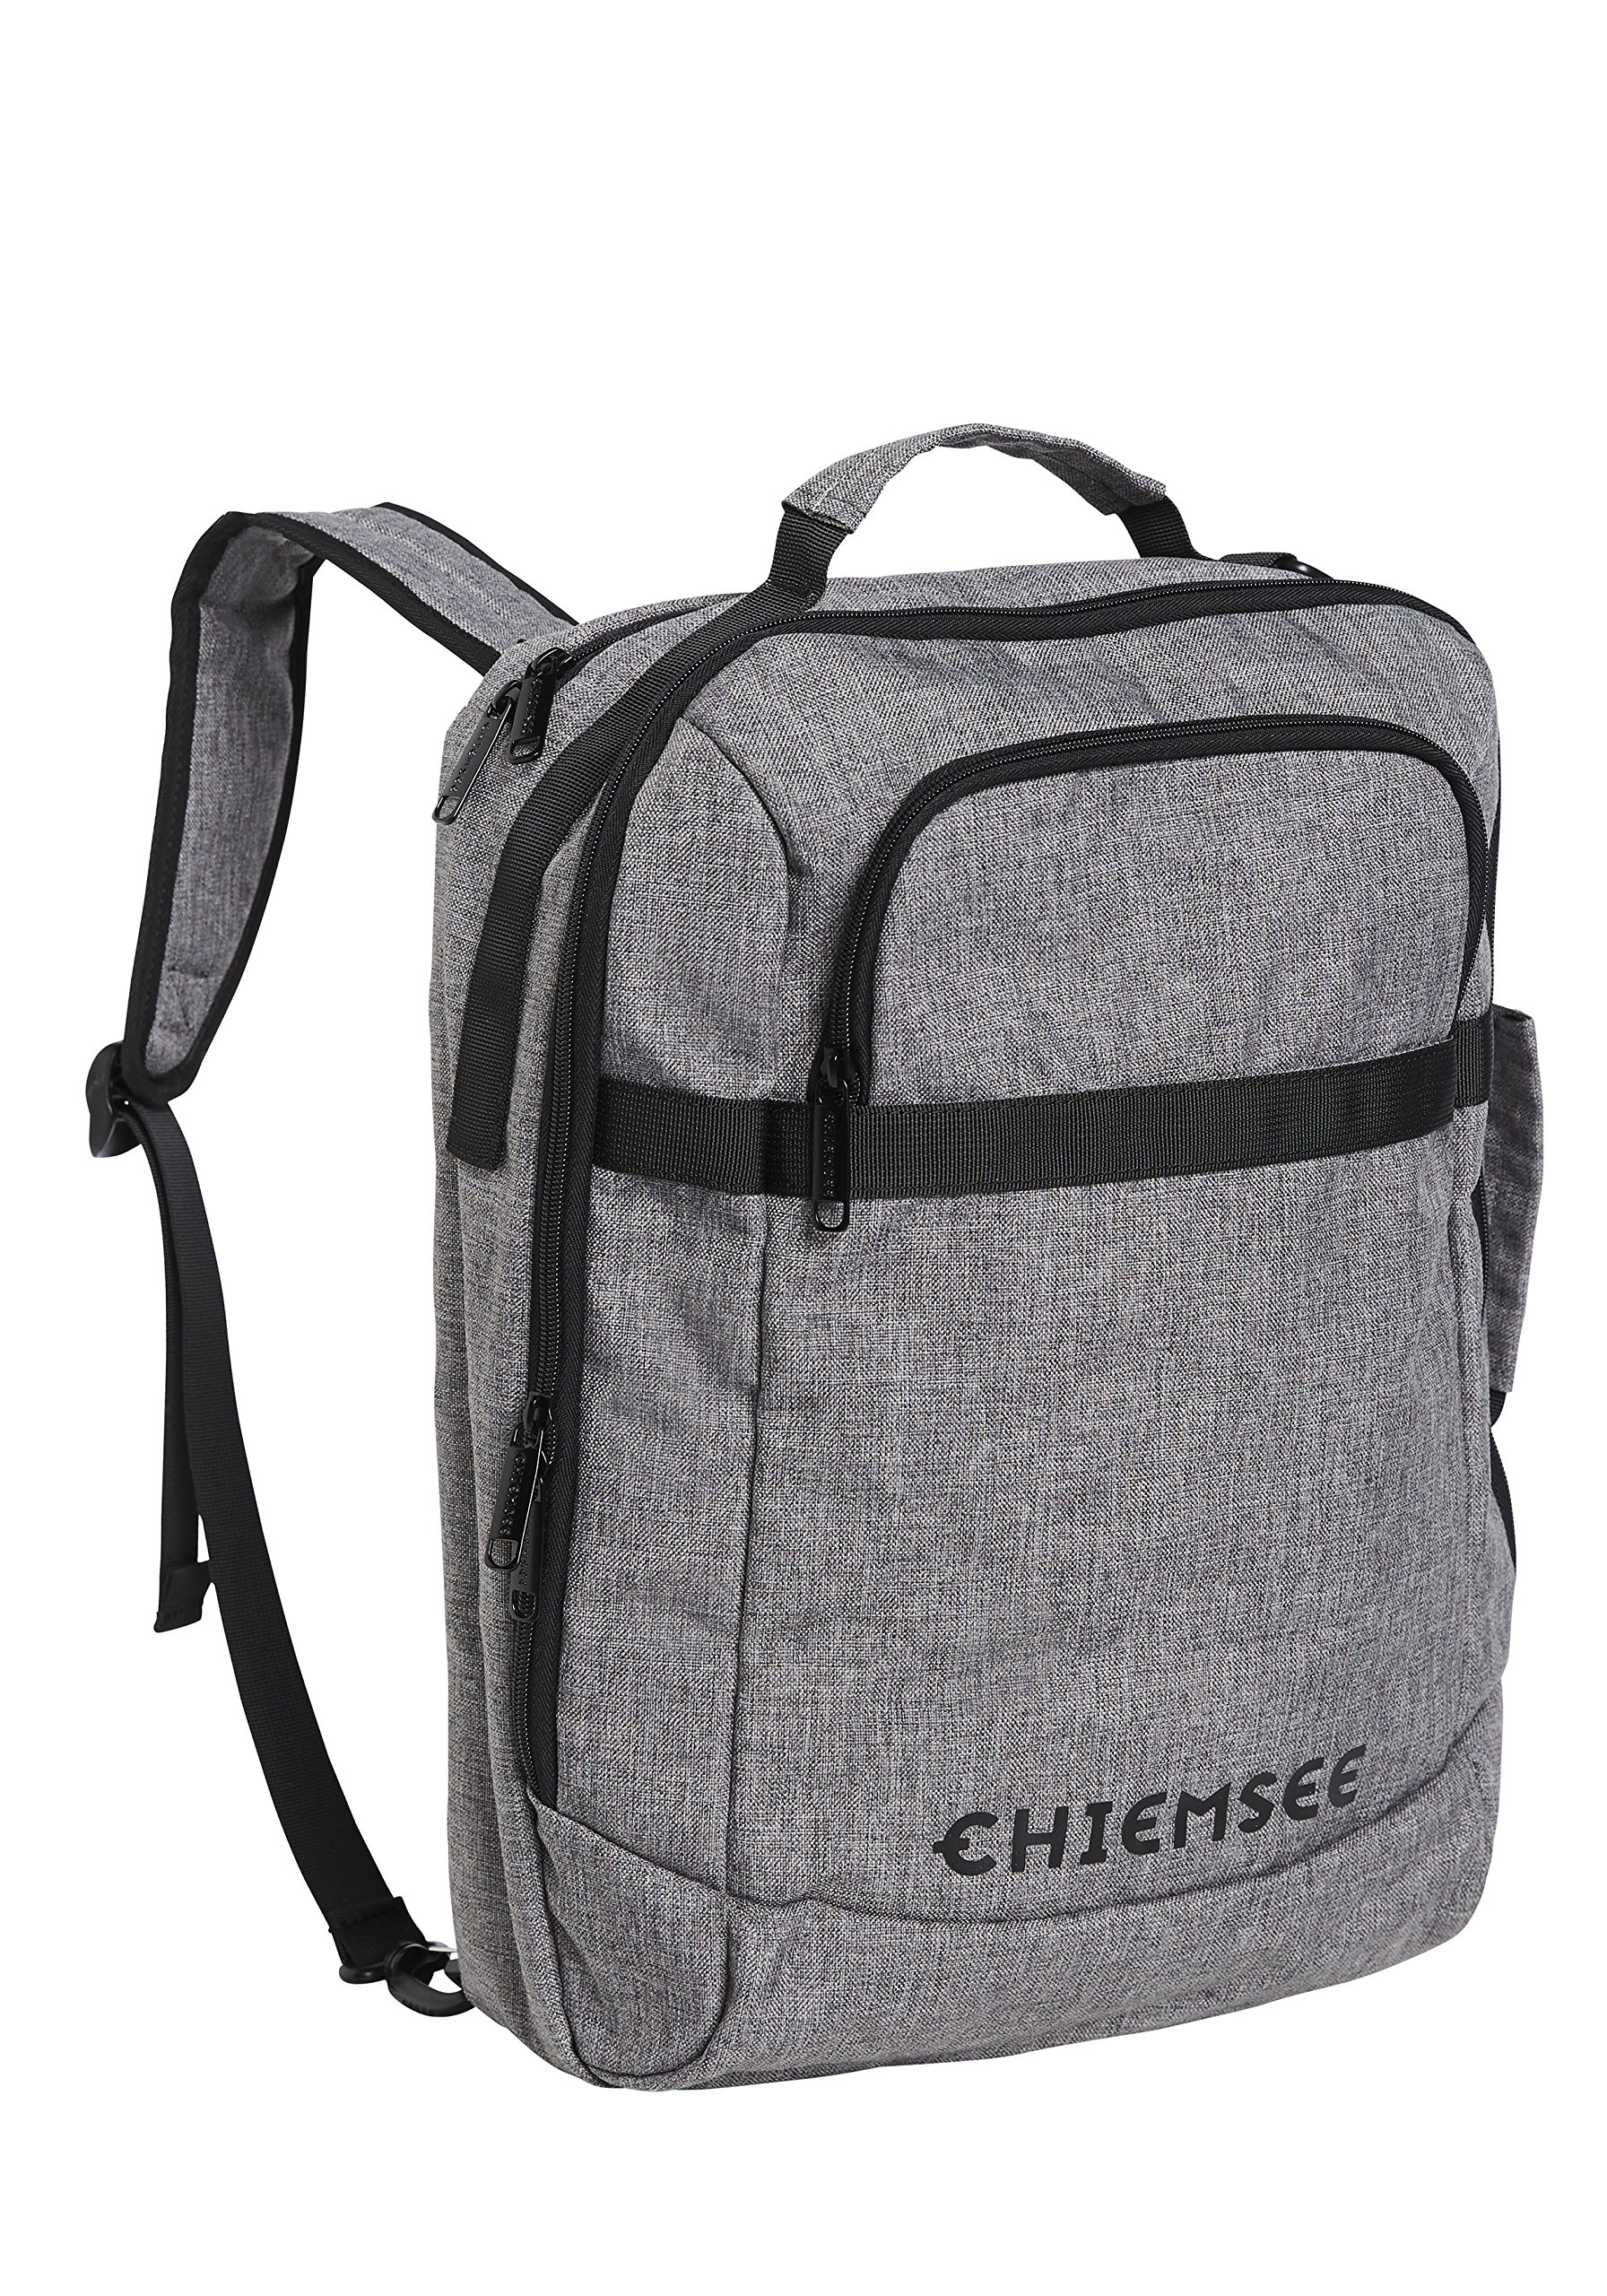 Chiemsee Bags Collection Koffer, 41 cm, 19-3901M Melange